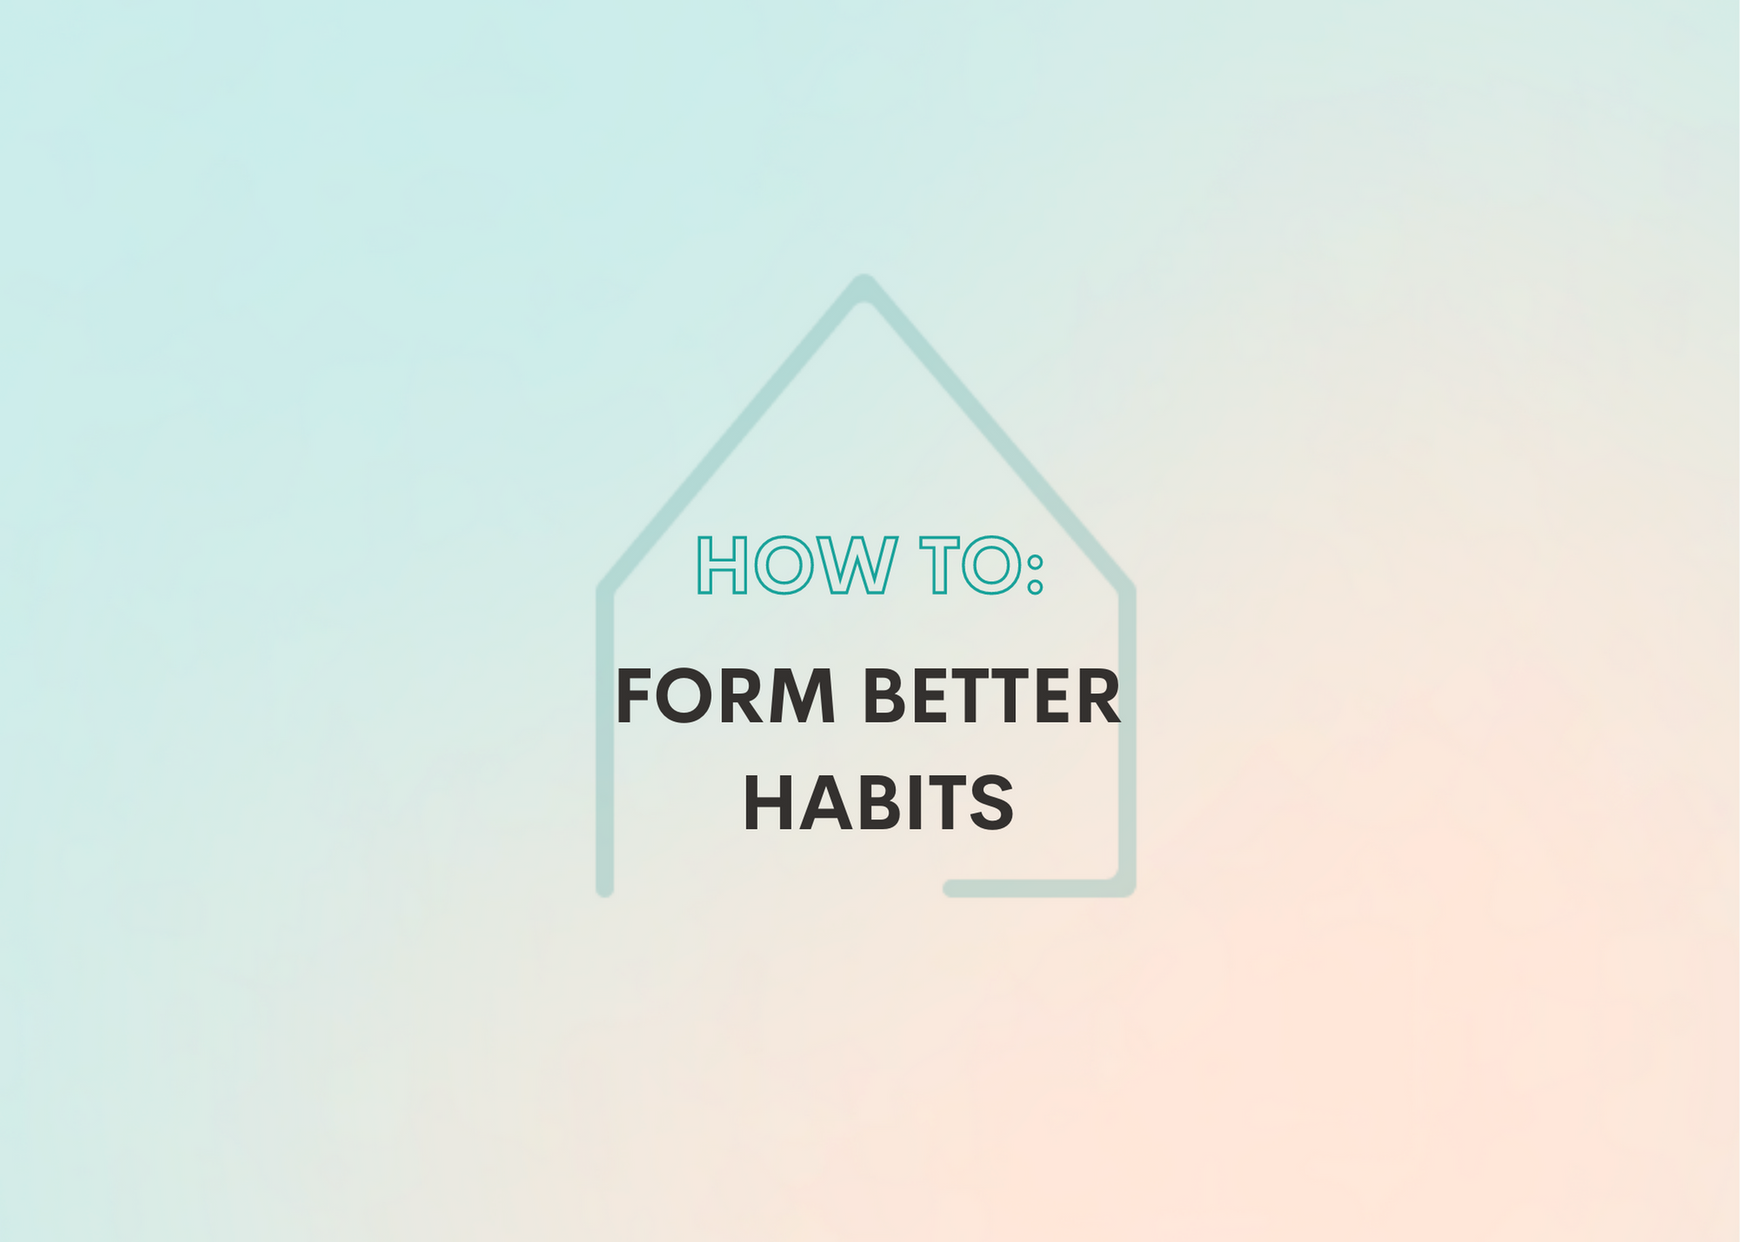 How to better form habits using the habit loop